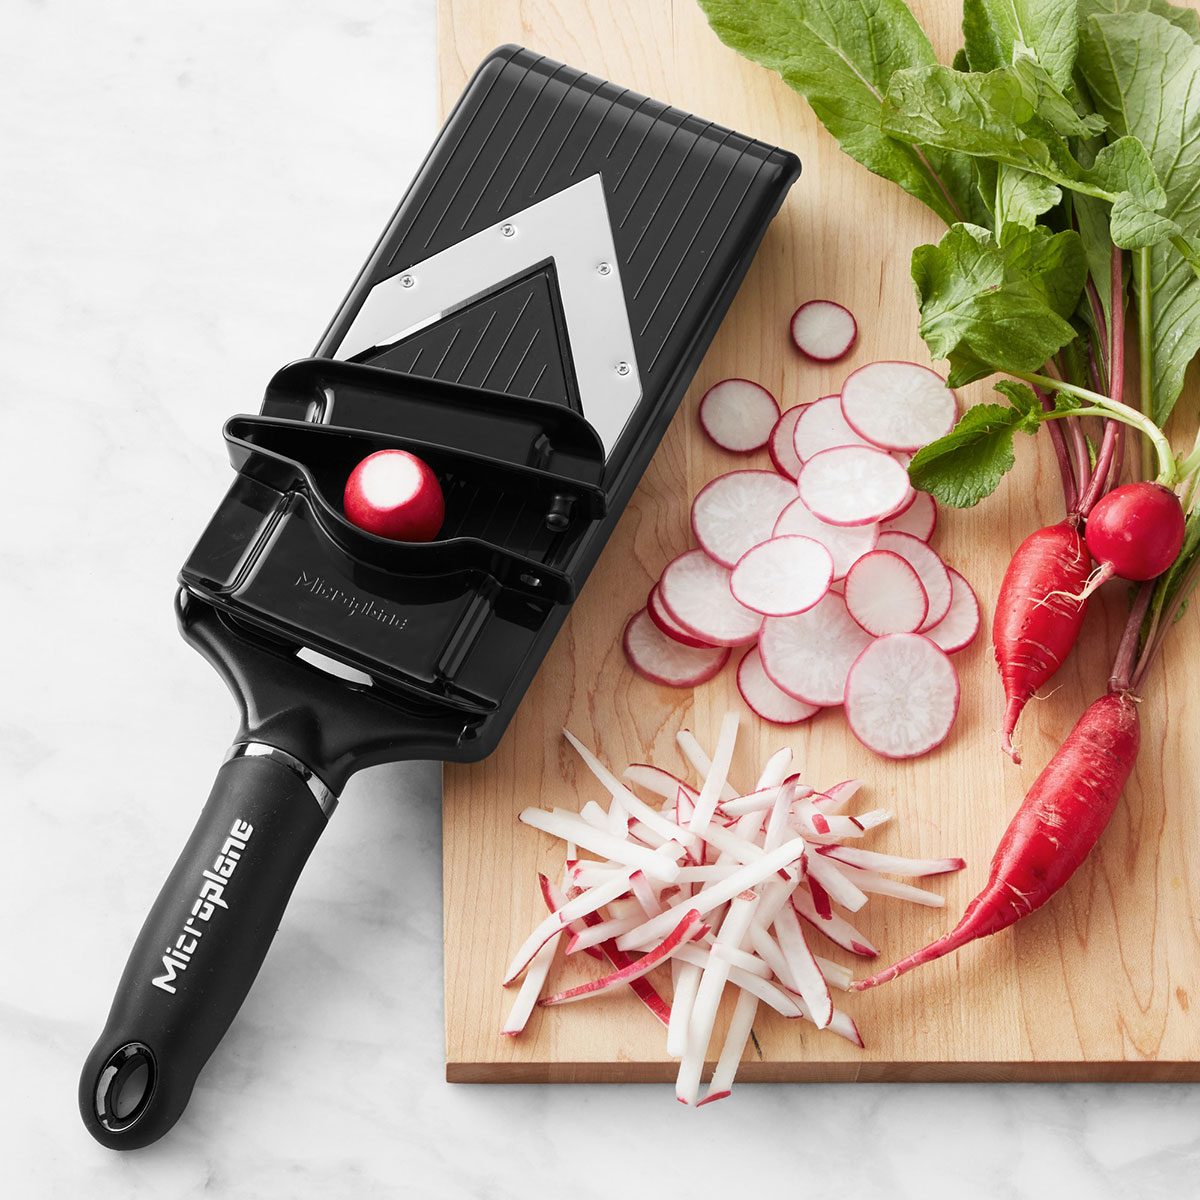 This Top-Rated Mandoline Veggie Slicer Is the Ultimate Kitchen Sidekick